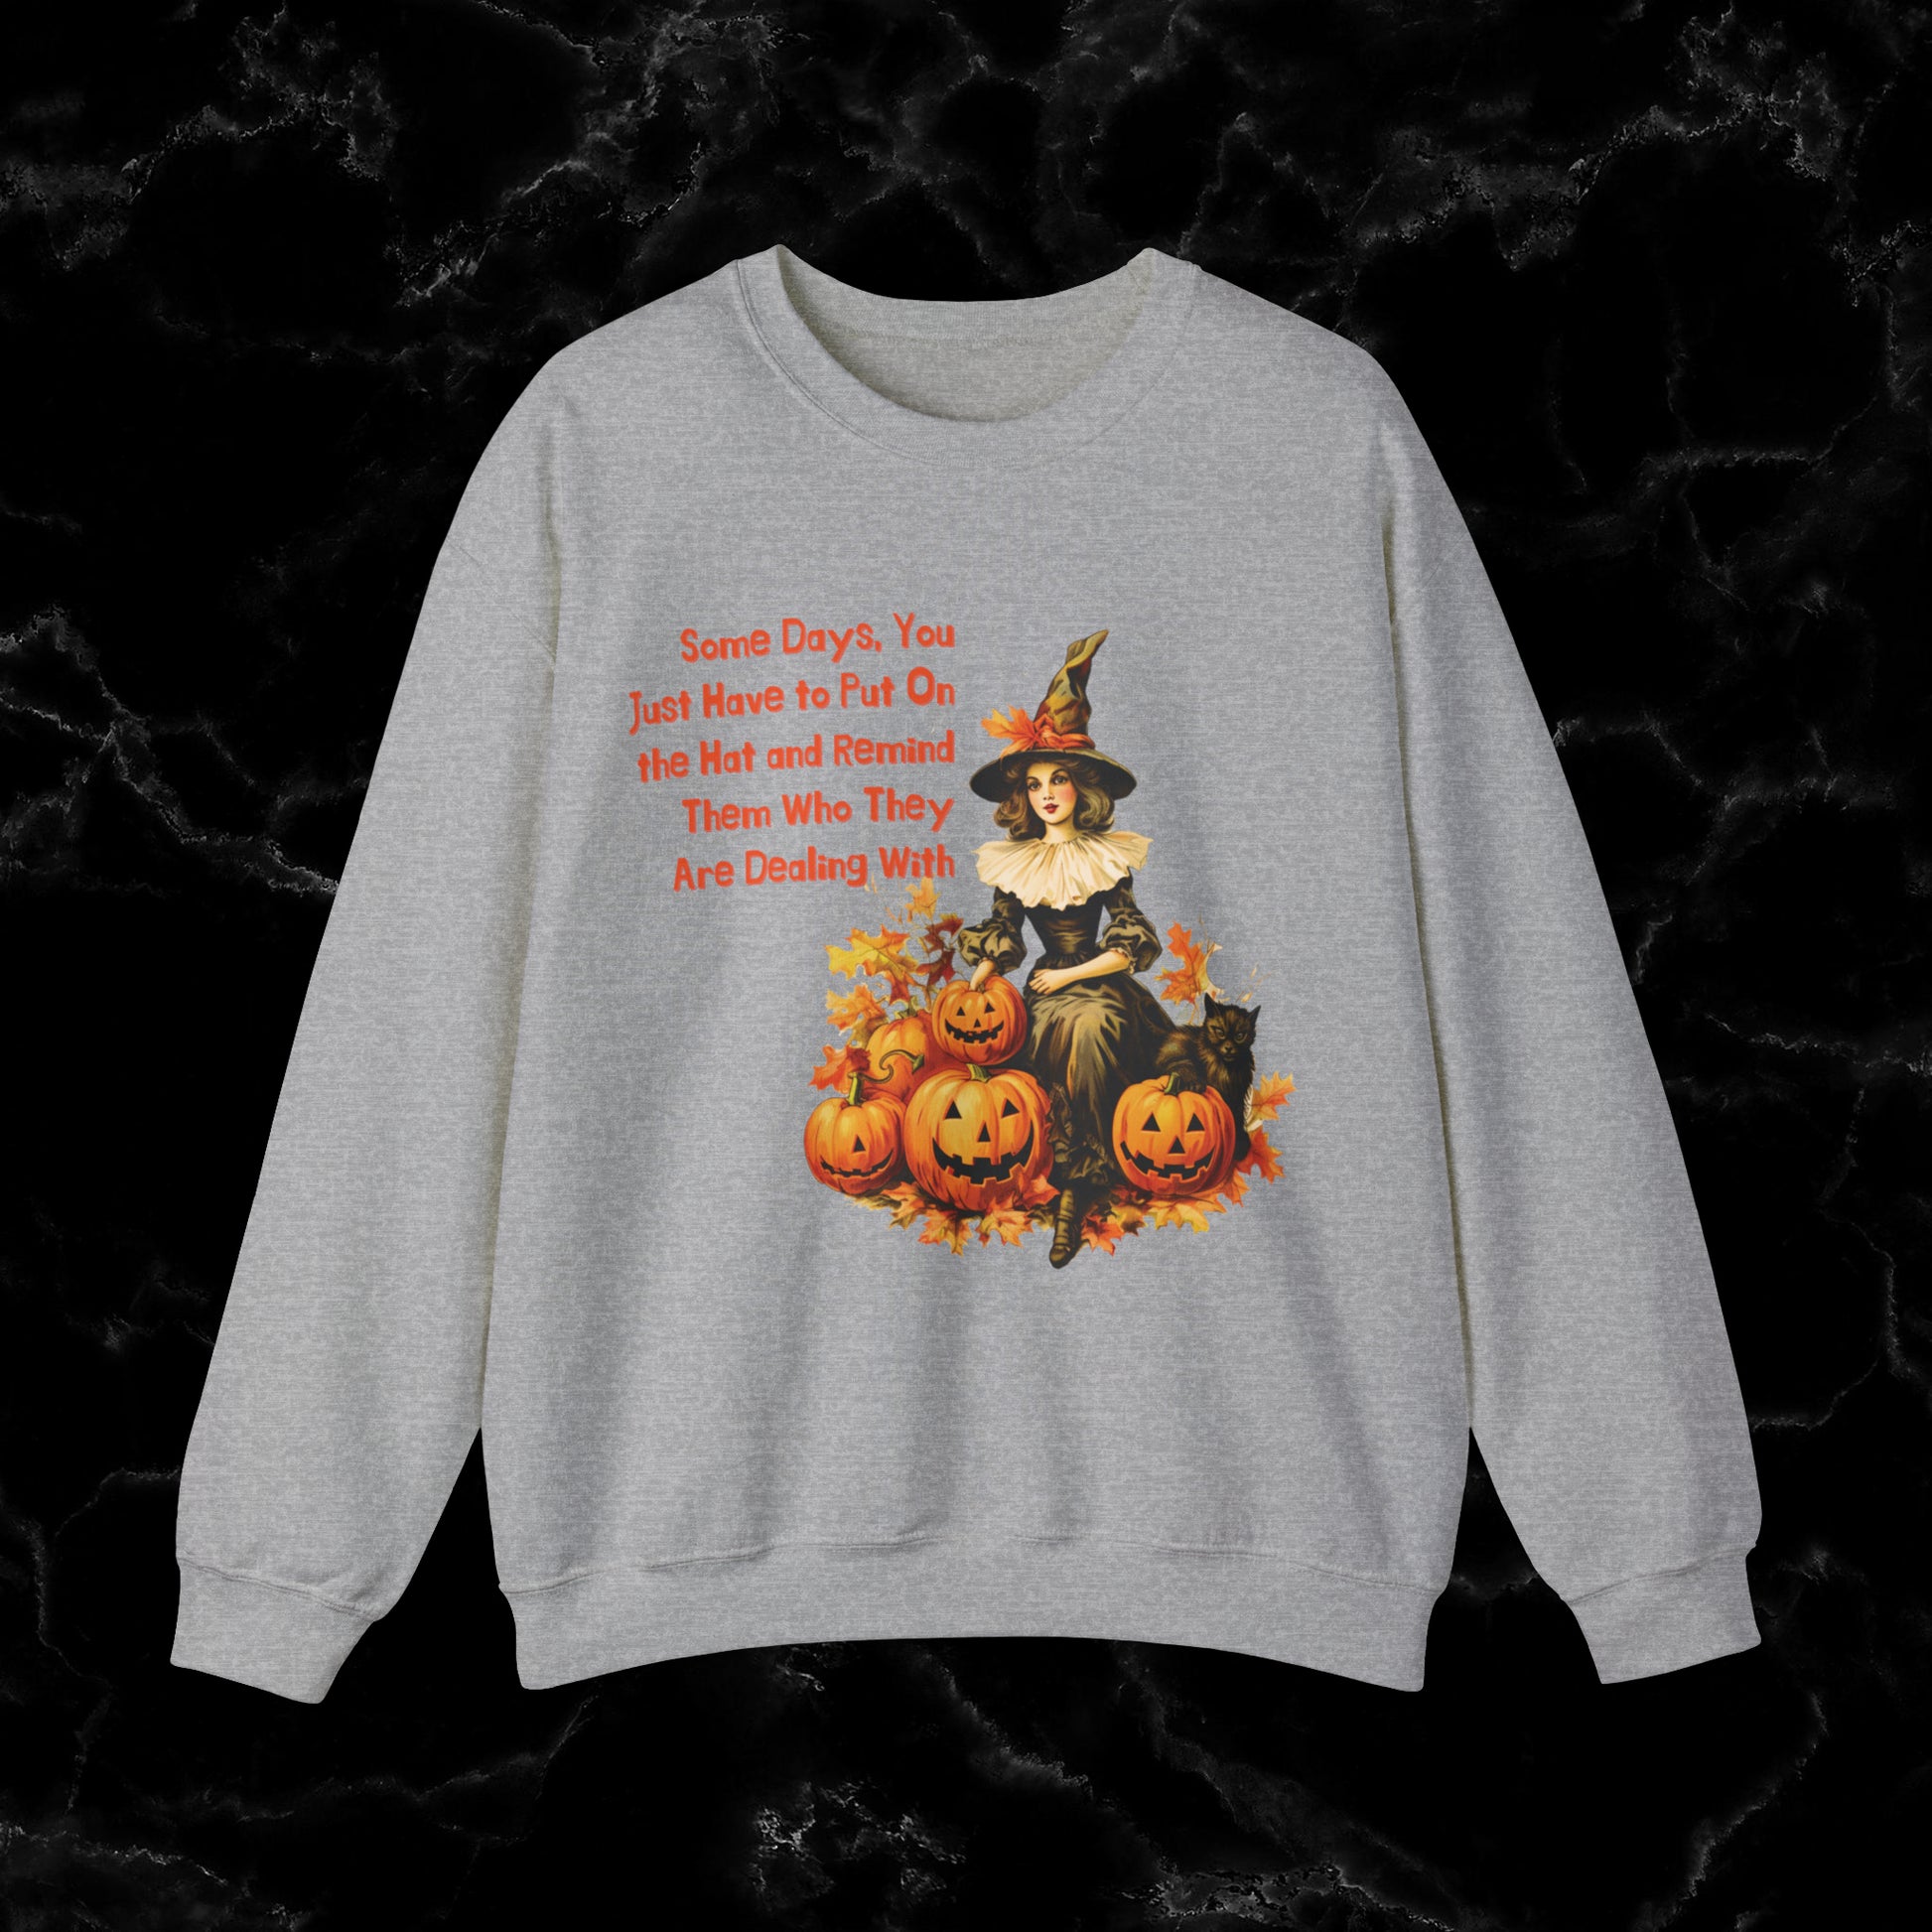 Witch Halloween Gift with Witch Quote - Halloween Sweatshirt - Perfect for Wifes, autunts, Sisters Sweatshirt S Sport Grey 